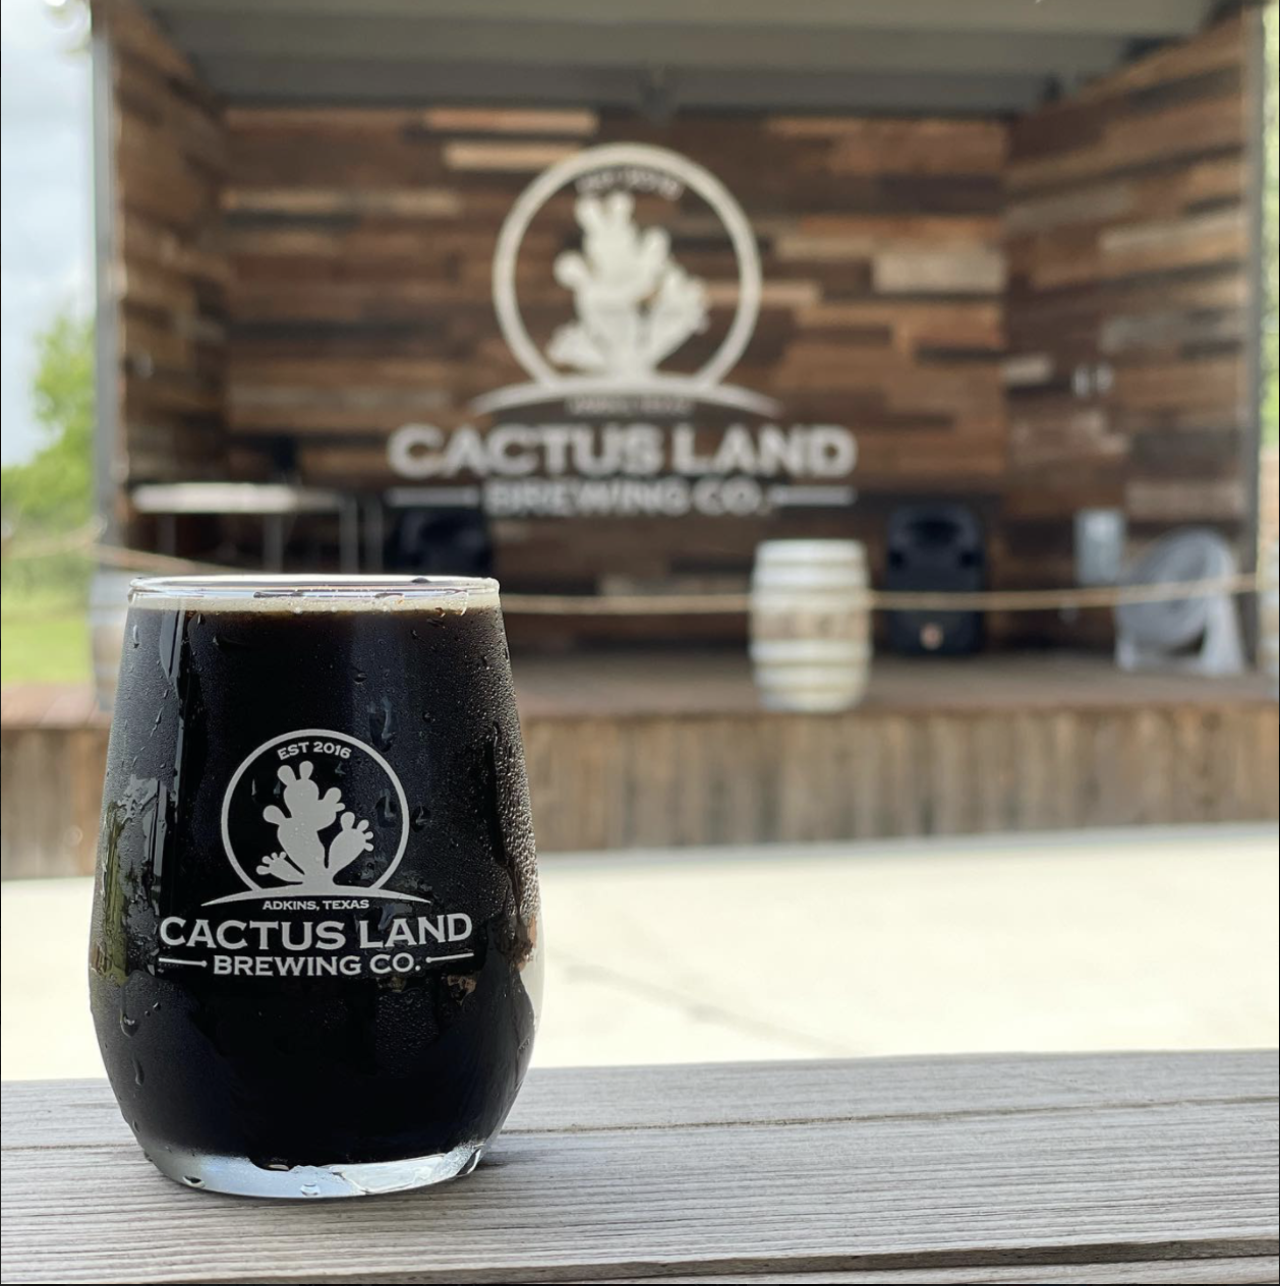 Cactus Land Brewing Company
368 County Rd 325, Adkins, (210) 414-2776, cactuslandbrewing.com
This taproom is open the first and third weekends of the month to bring you fresh brews, fun eats provided by local food trucks, and live music on its outdoor stage. 
Photo via Instagram / cactuslandbrewing